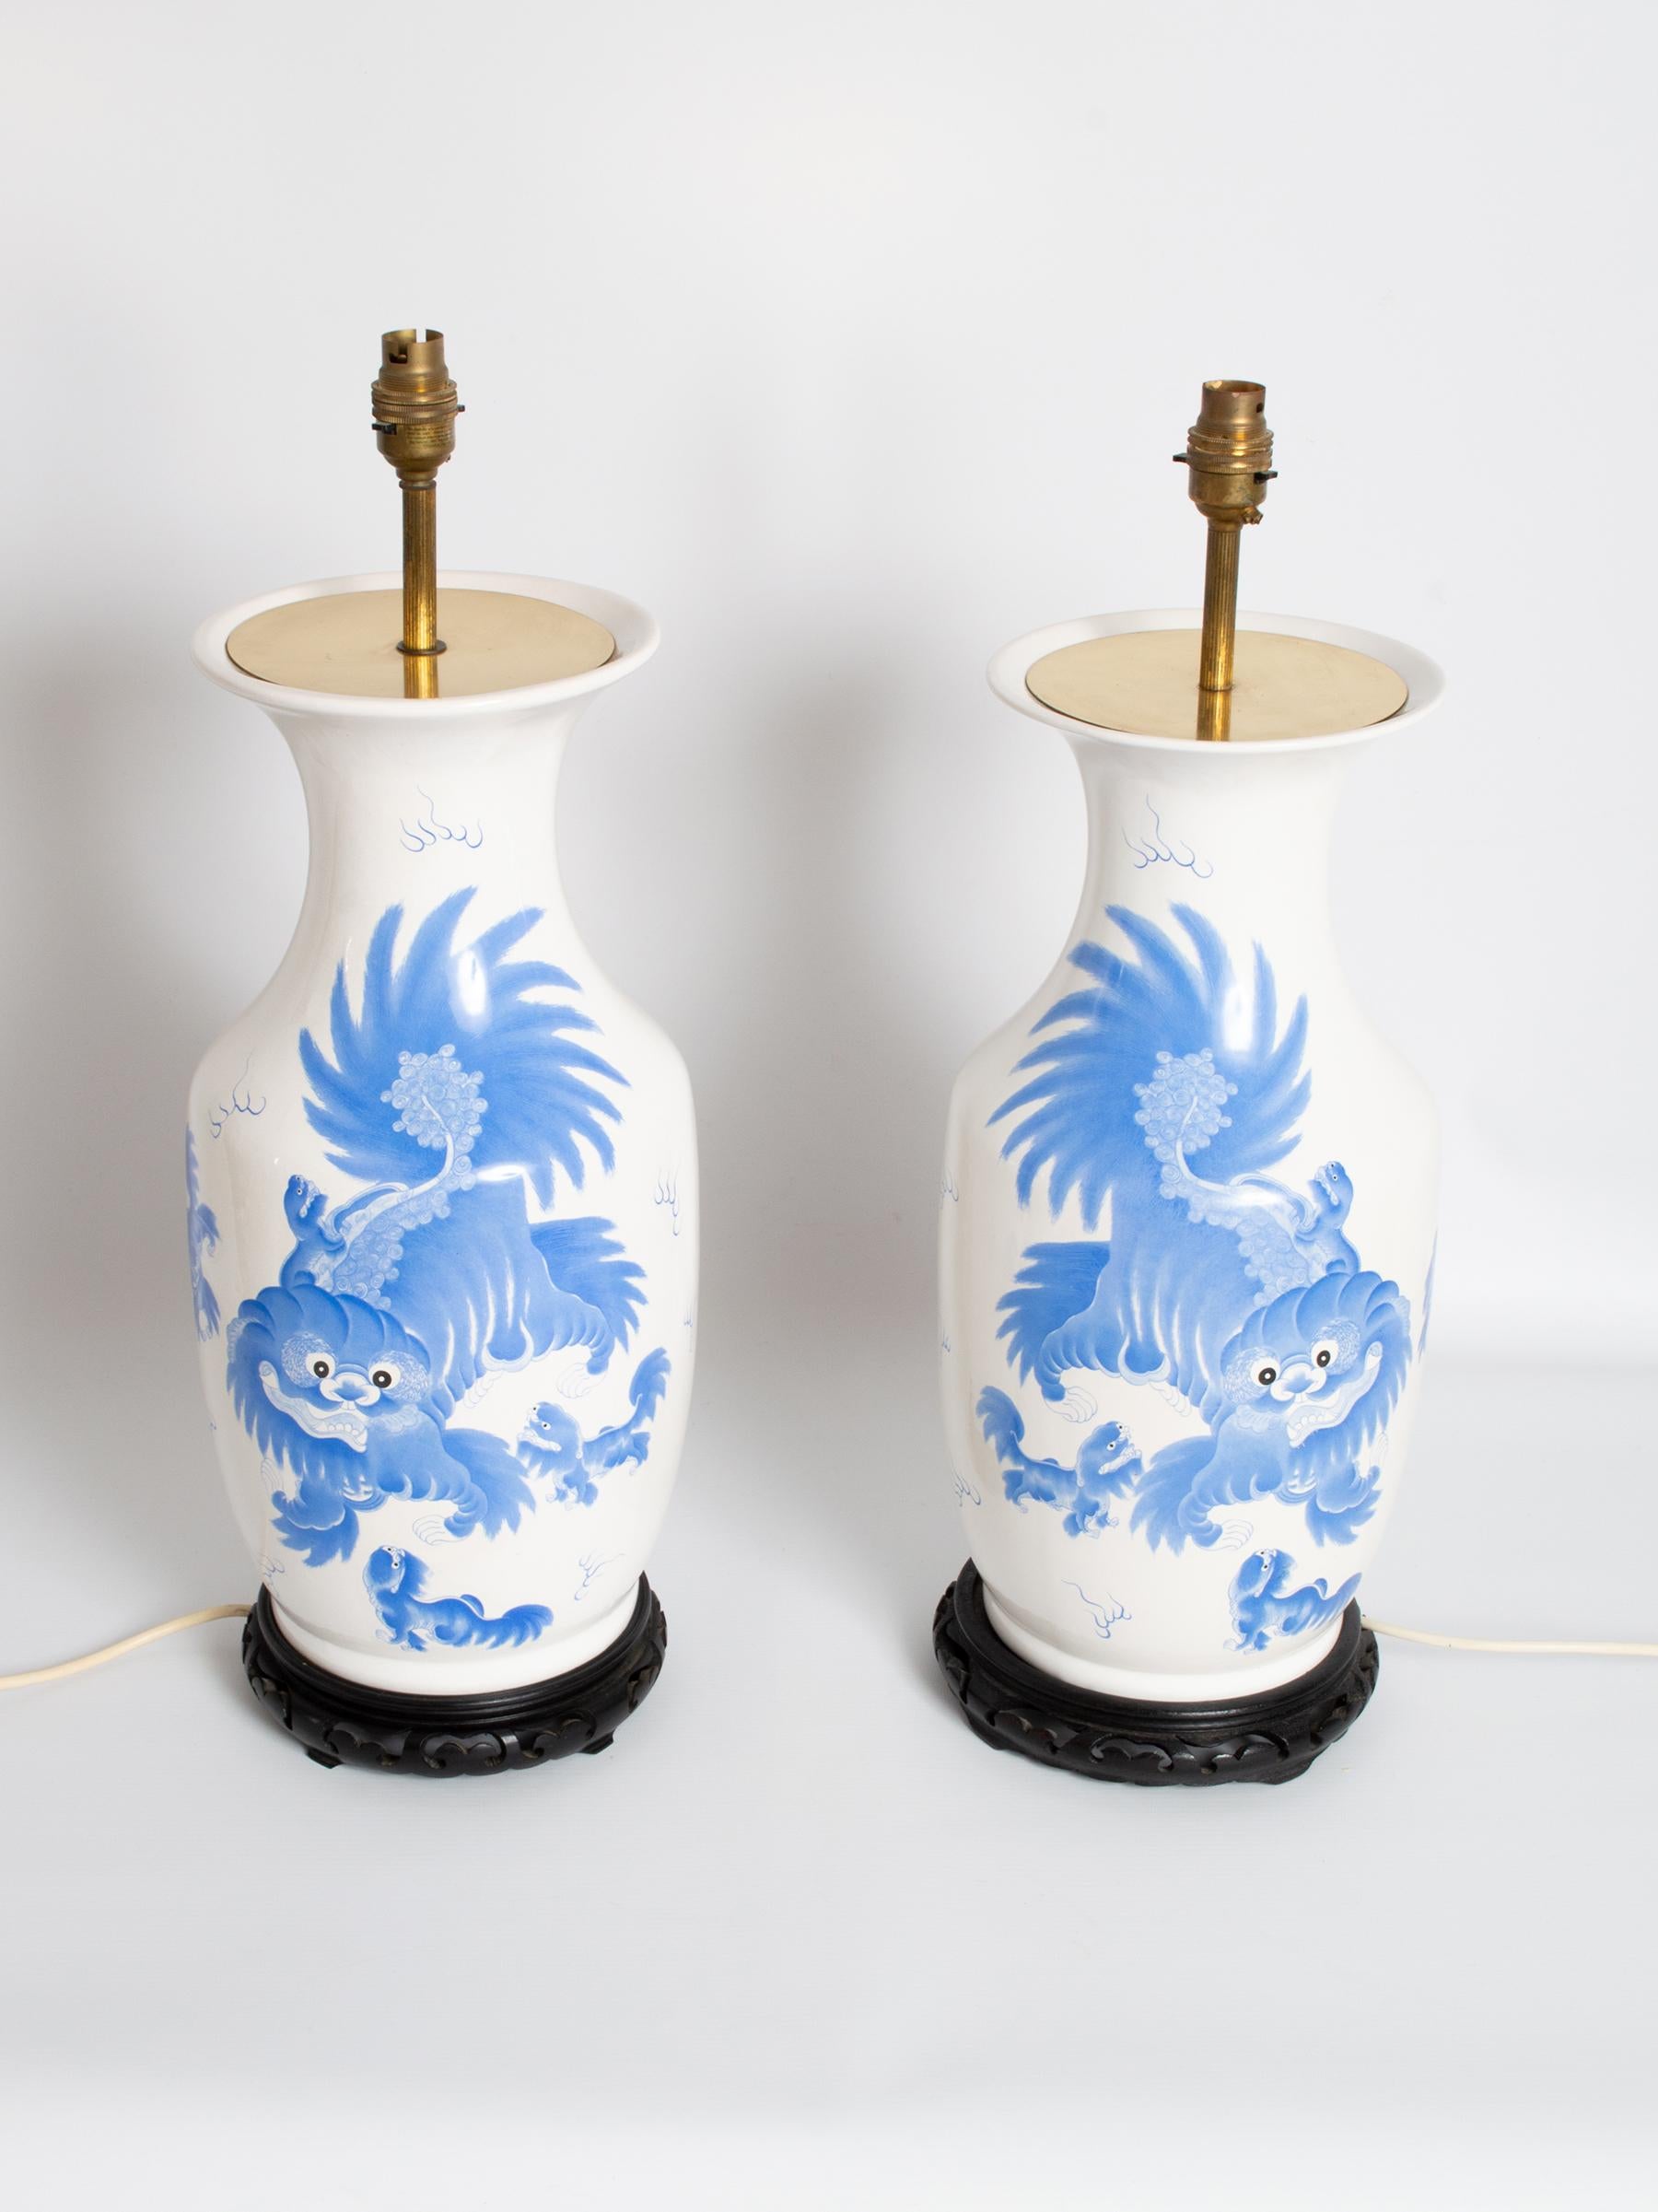 A fine pair of large antique 19th century blue and white dragon Chinese vase lamps.

In excellent condition commensurate of age. One lamp shows a very faint line of grazing to the porcelain (this can be seen in the photos).